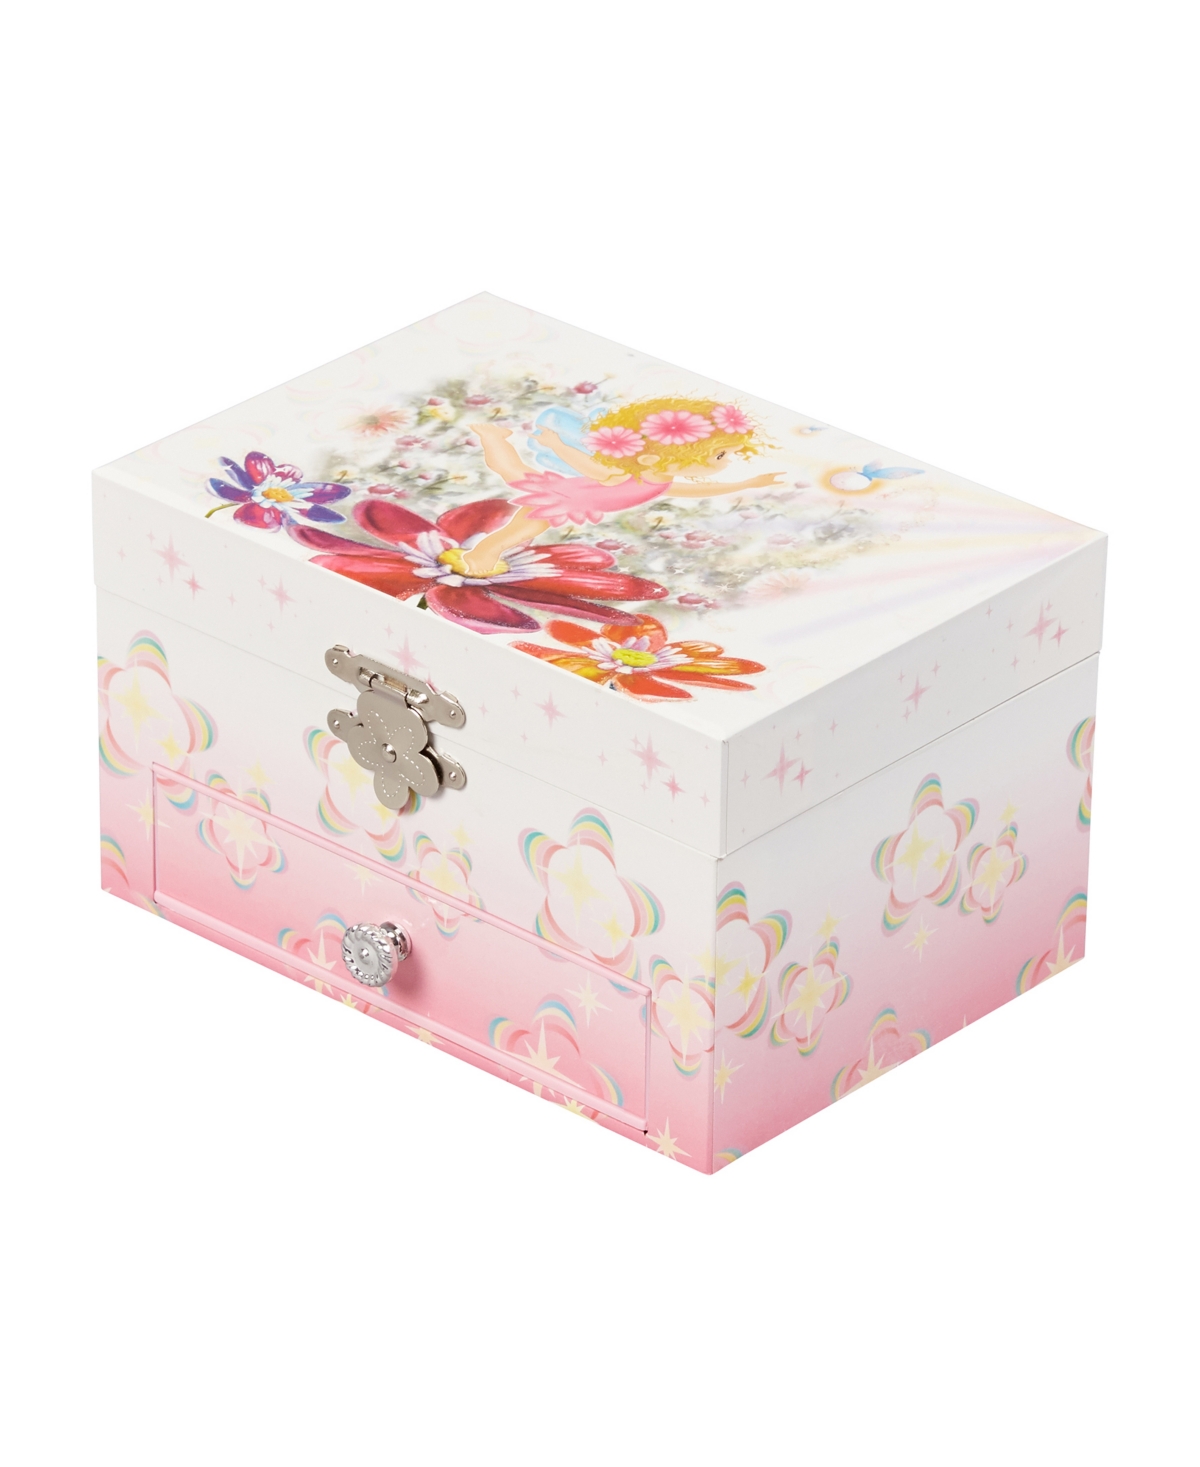 Mele & Co. Ashley Girl's Musical Ballerina Fairy and Flowers Jewelry Box - White